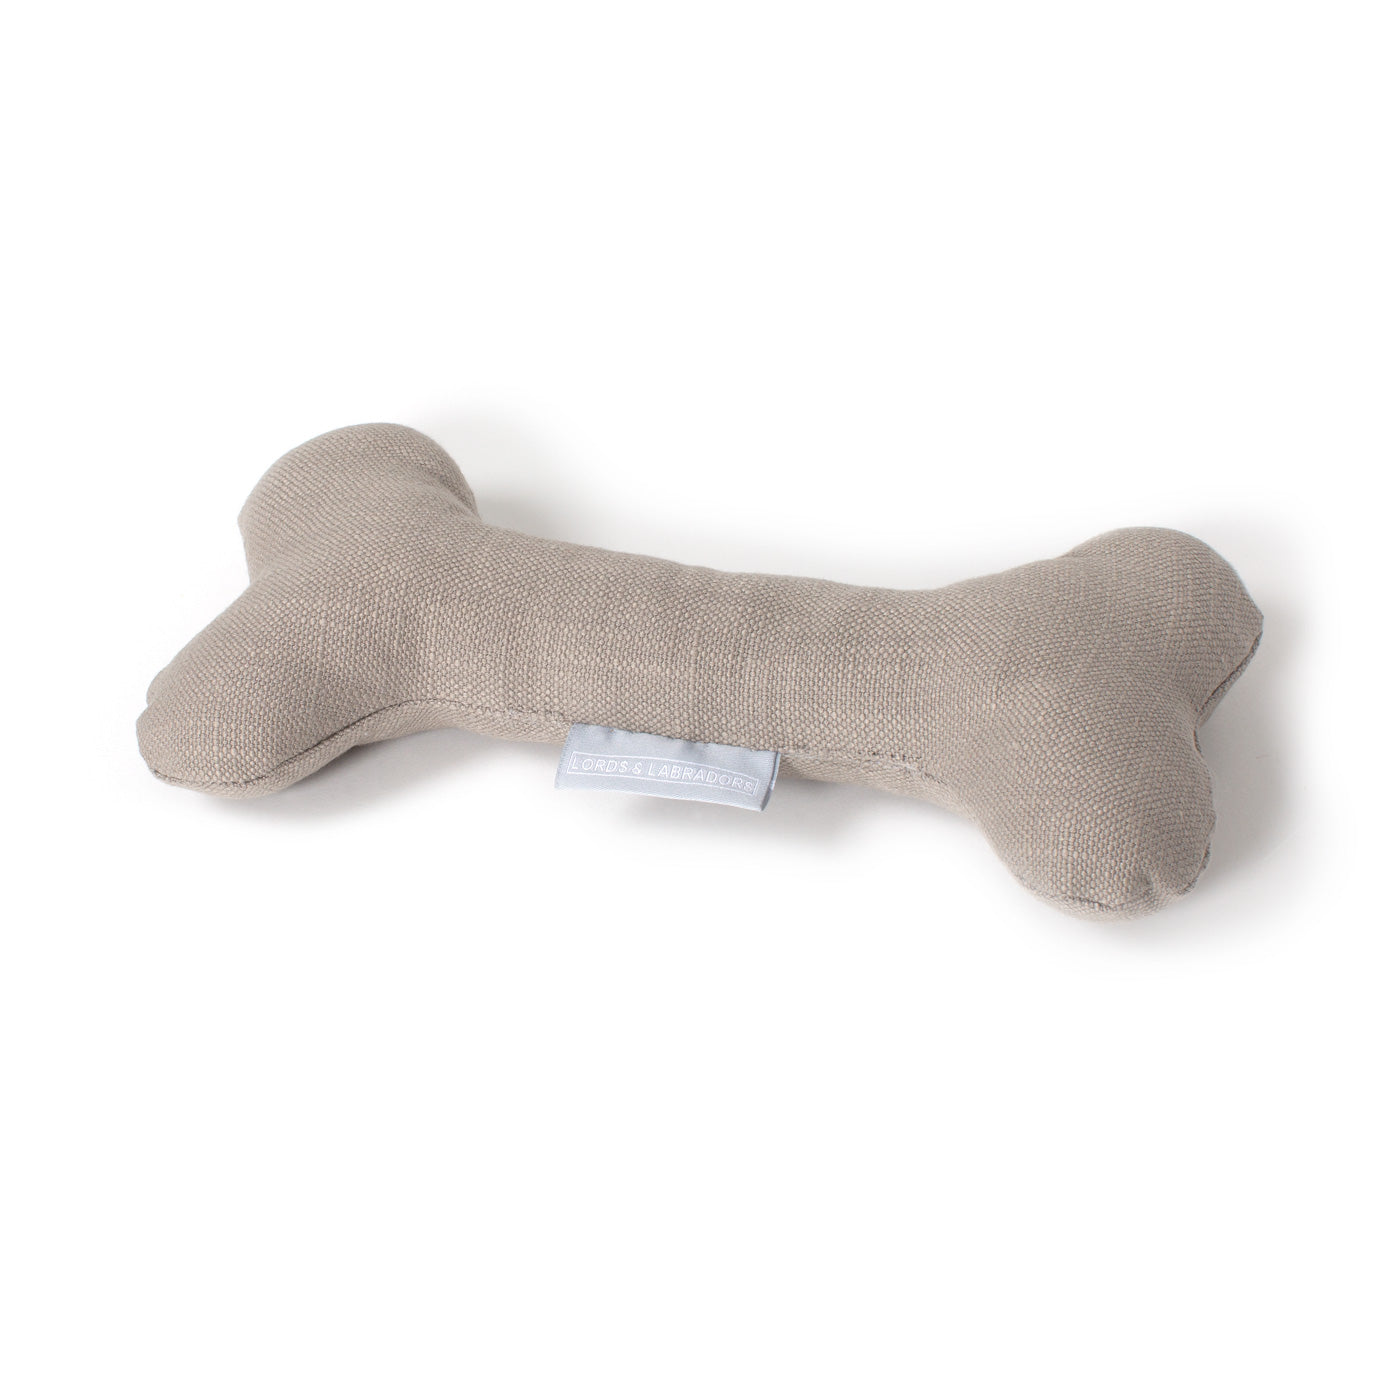 Present The Perfect Pet Playtime With Our Luxury Dog Bone Toy, In Stunning Savanna Stone! Available To Personalize Now at Lords & Labradors US